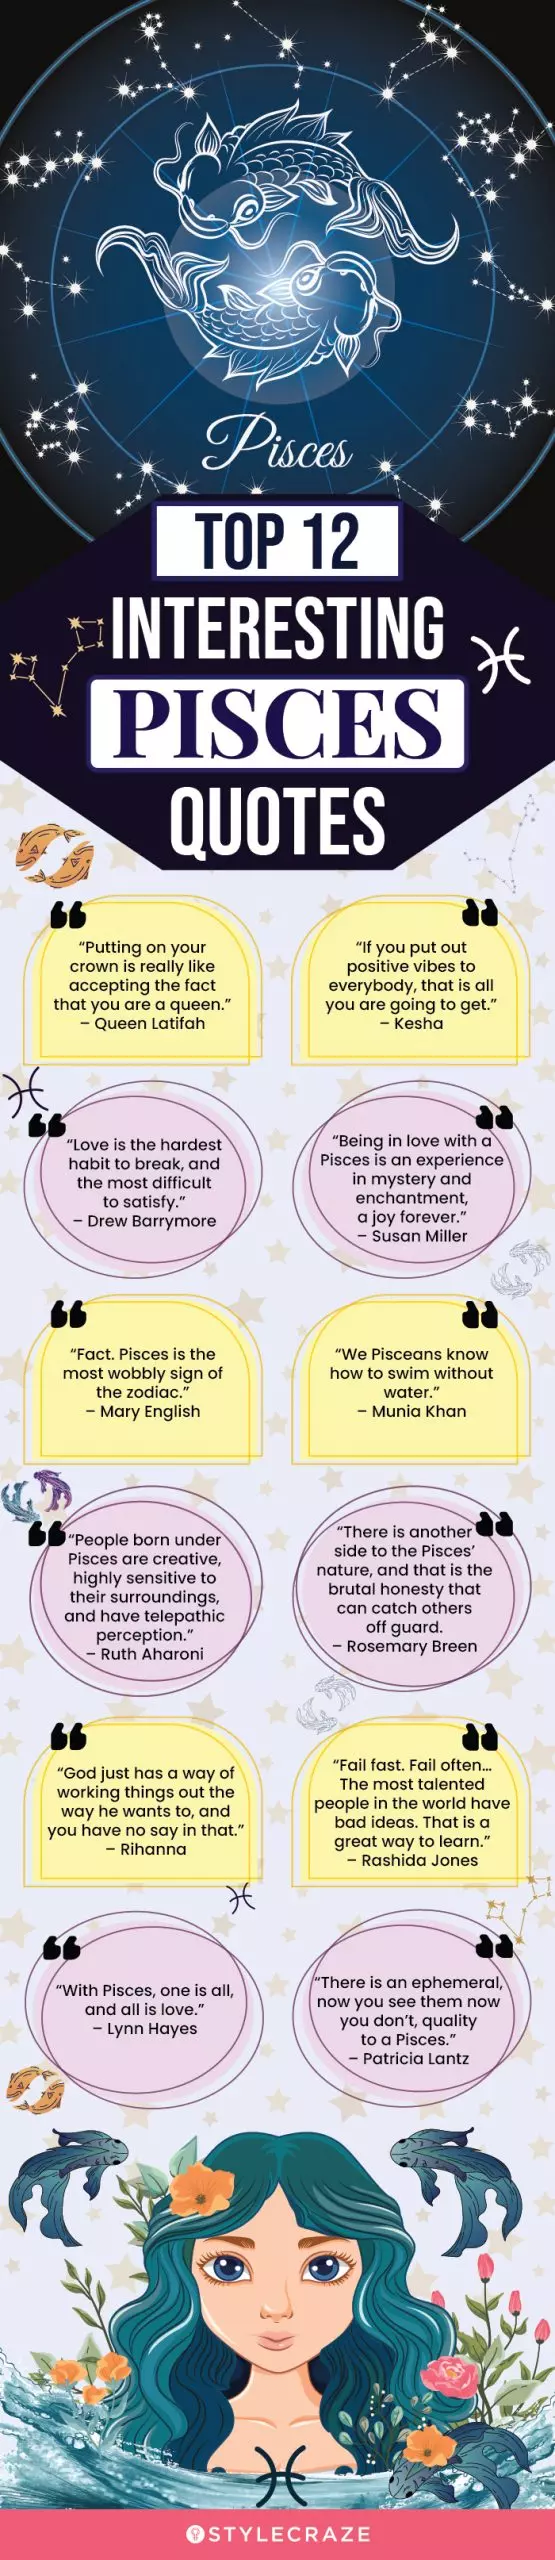 top 12 interesting pisces quotes (infographic)